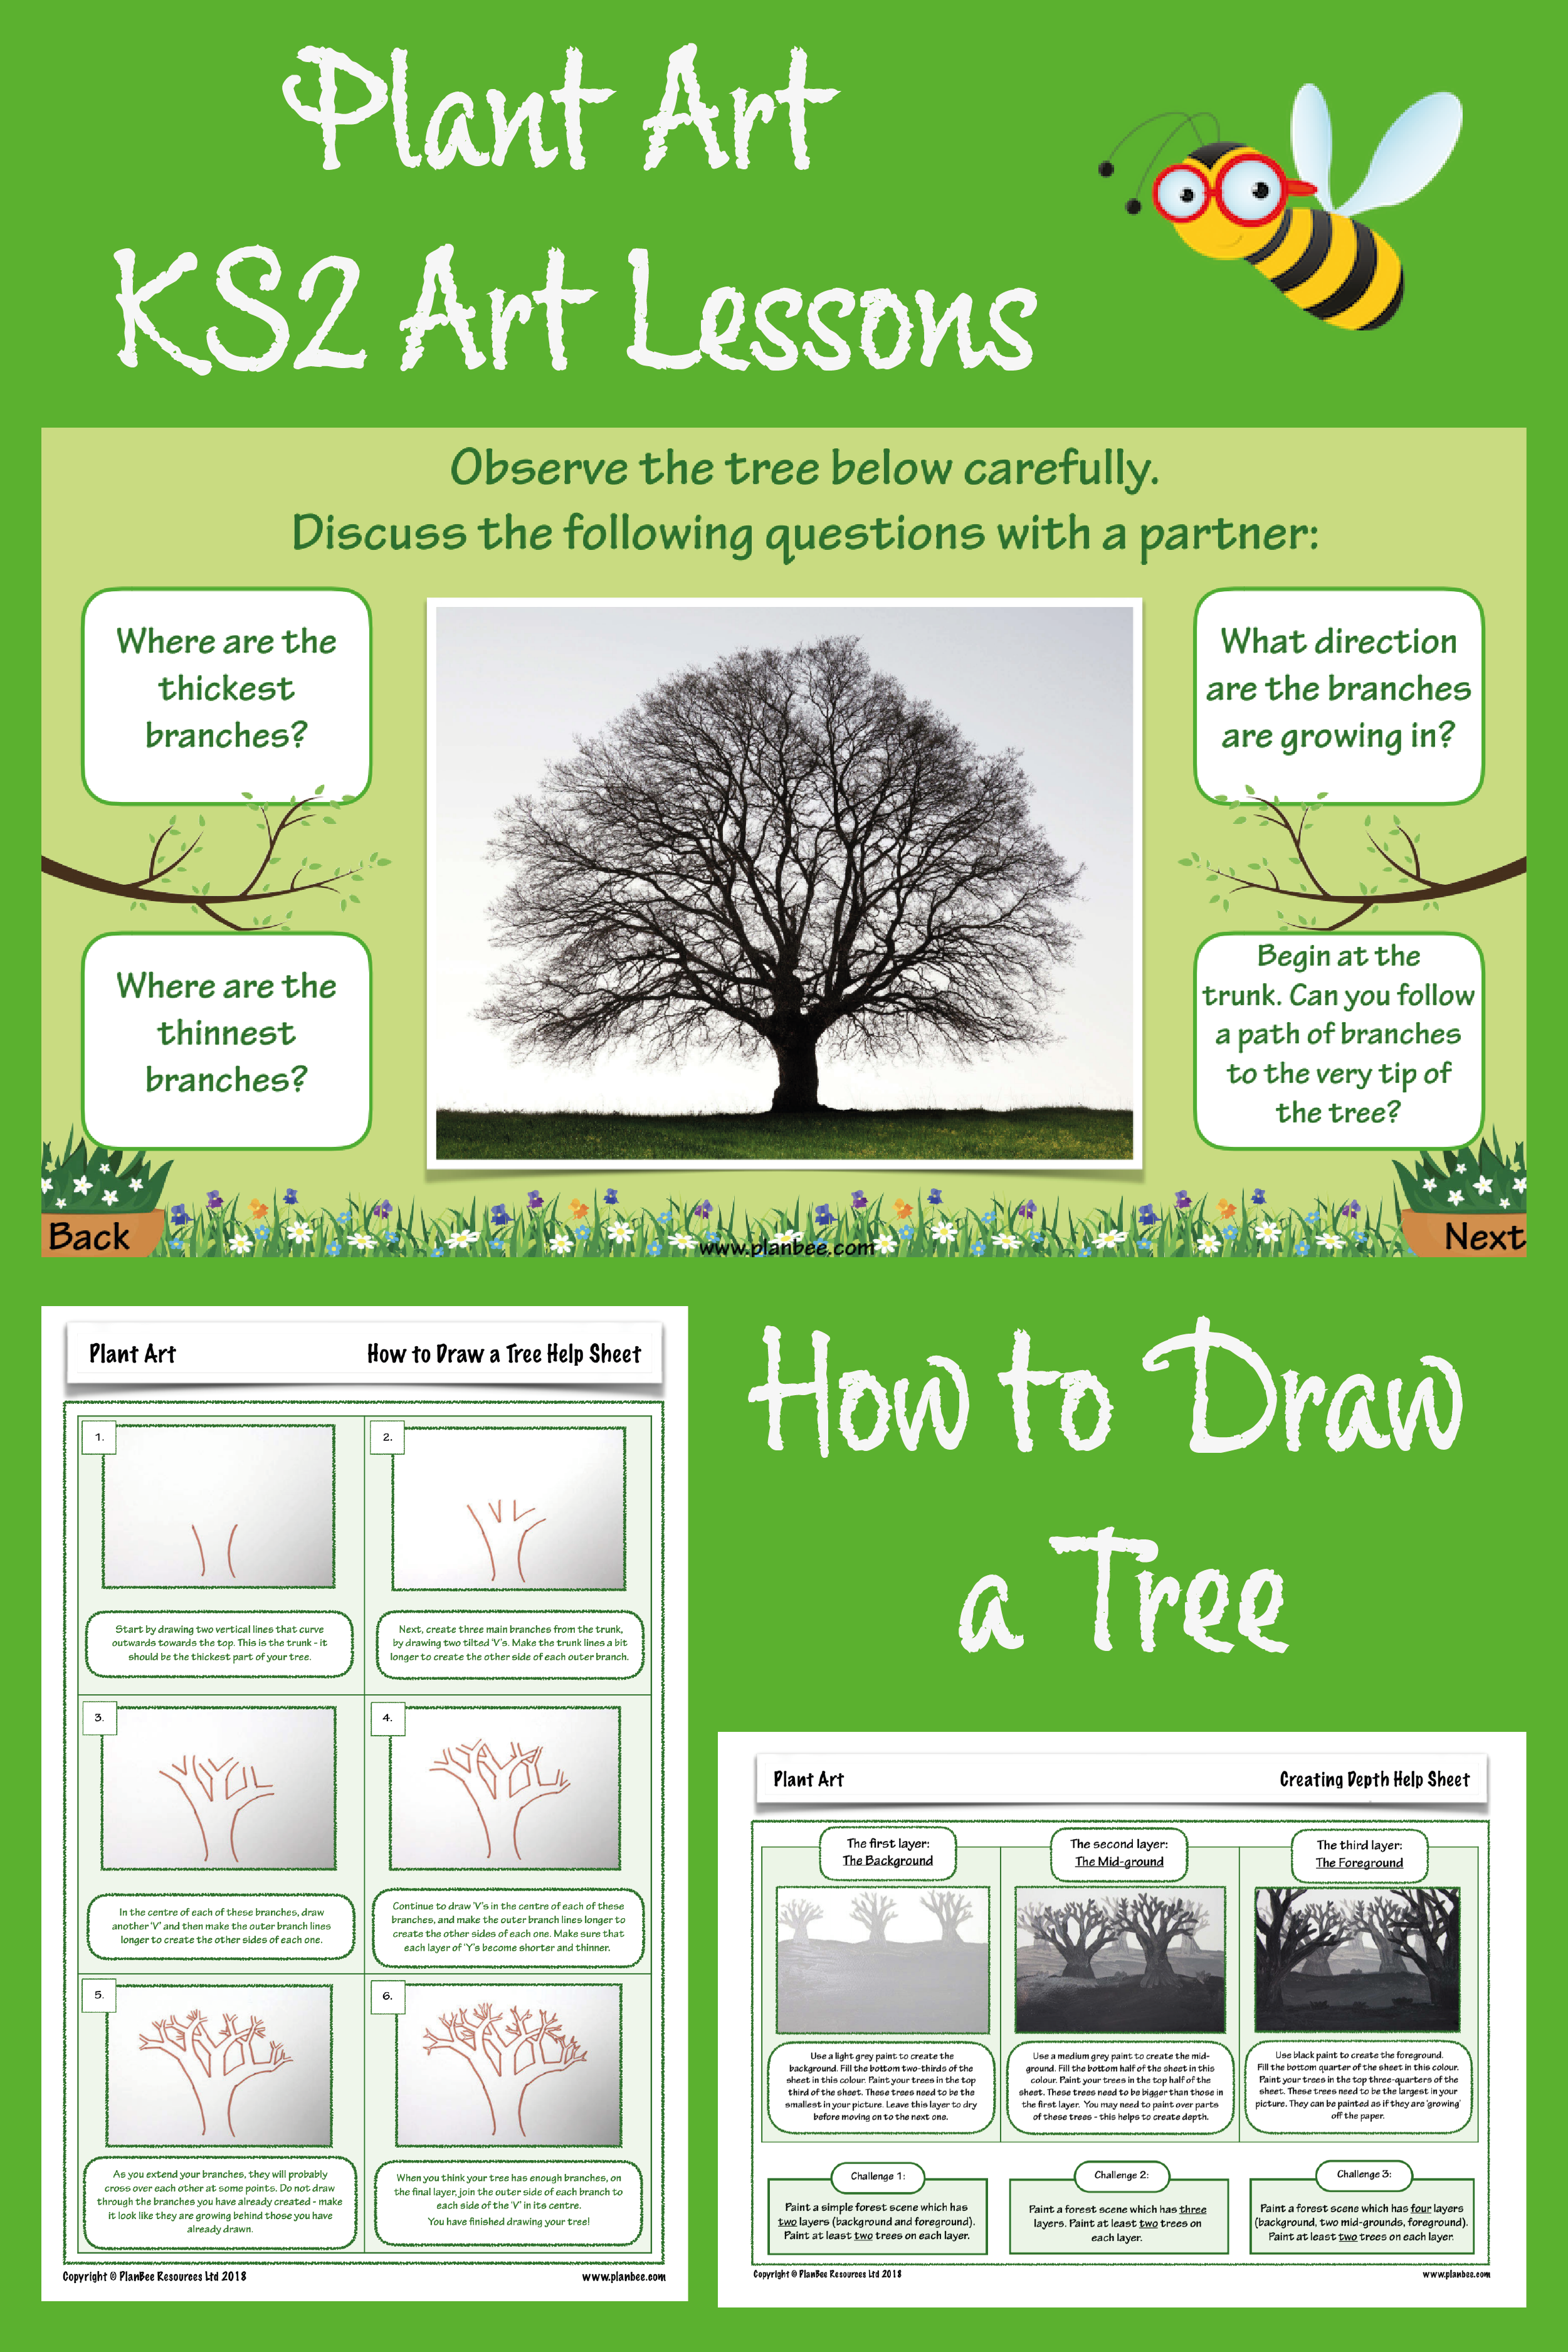 How to Draw a Tree for Kids -   13 planting Art ks2 ideas